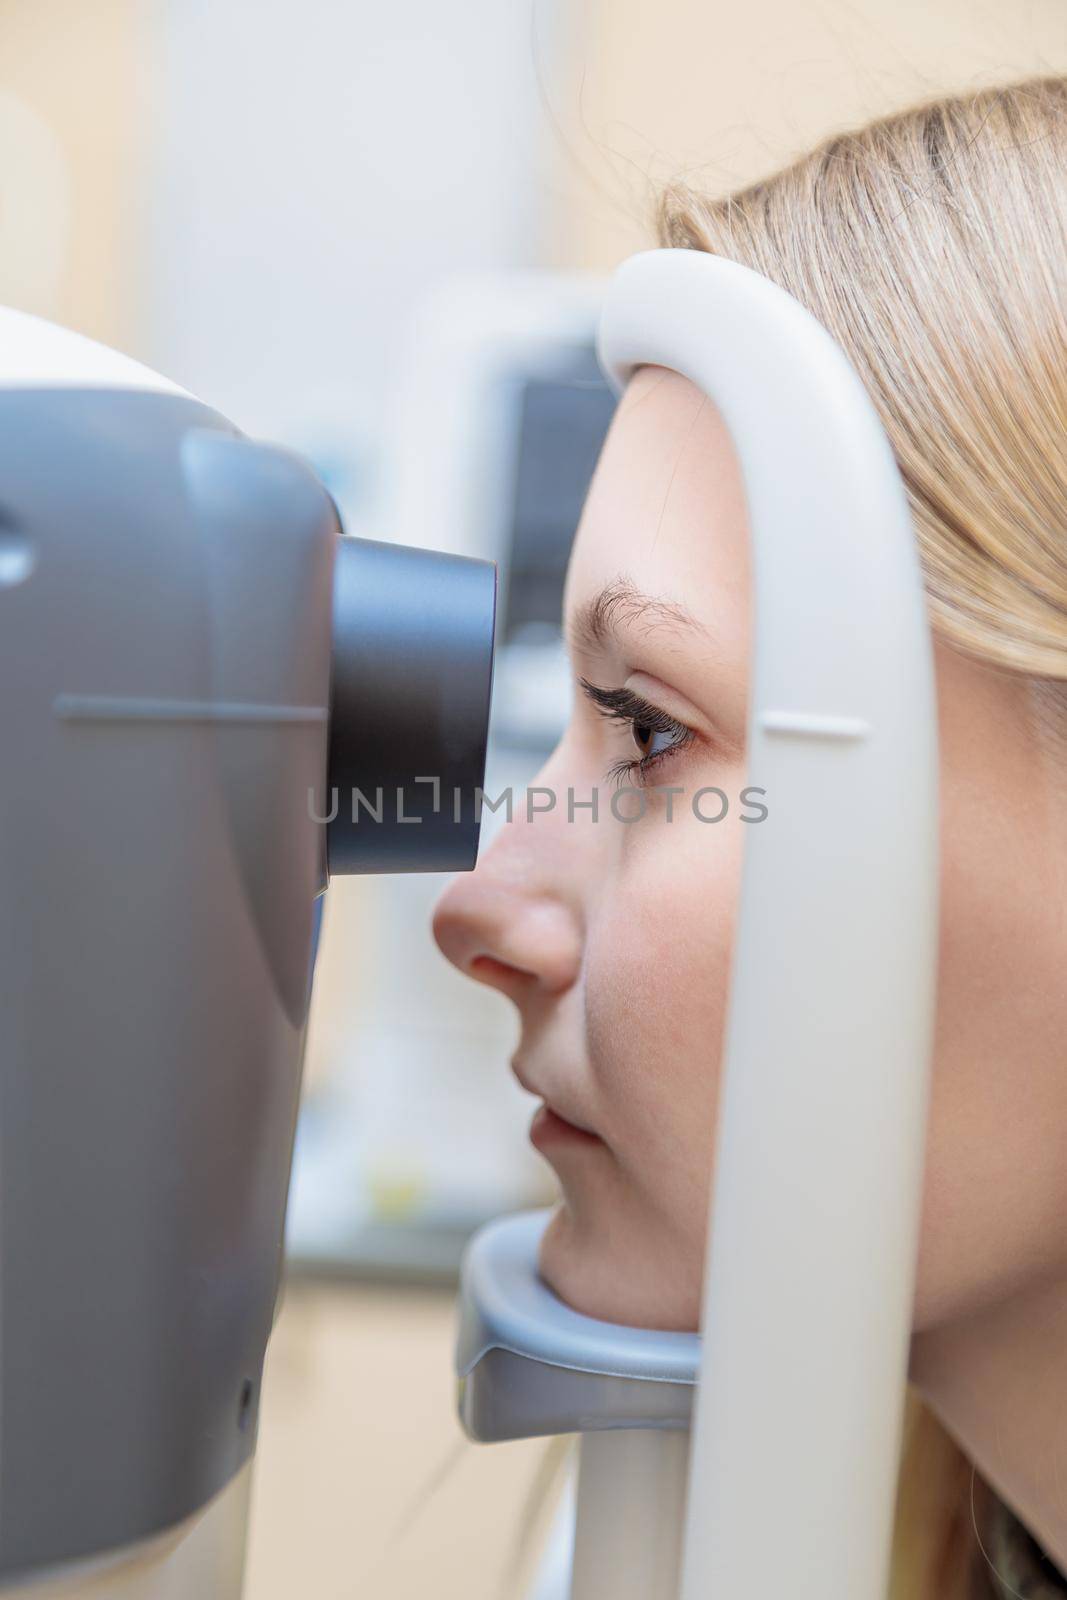 A young girl at the reception at the ophthalmologist checks her eyesight on a special apparatus. Close-up.